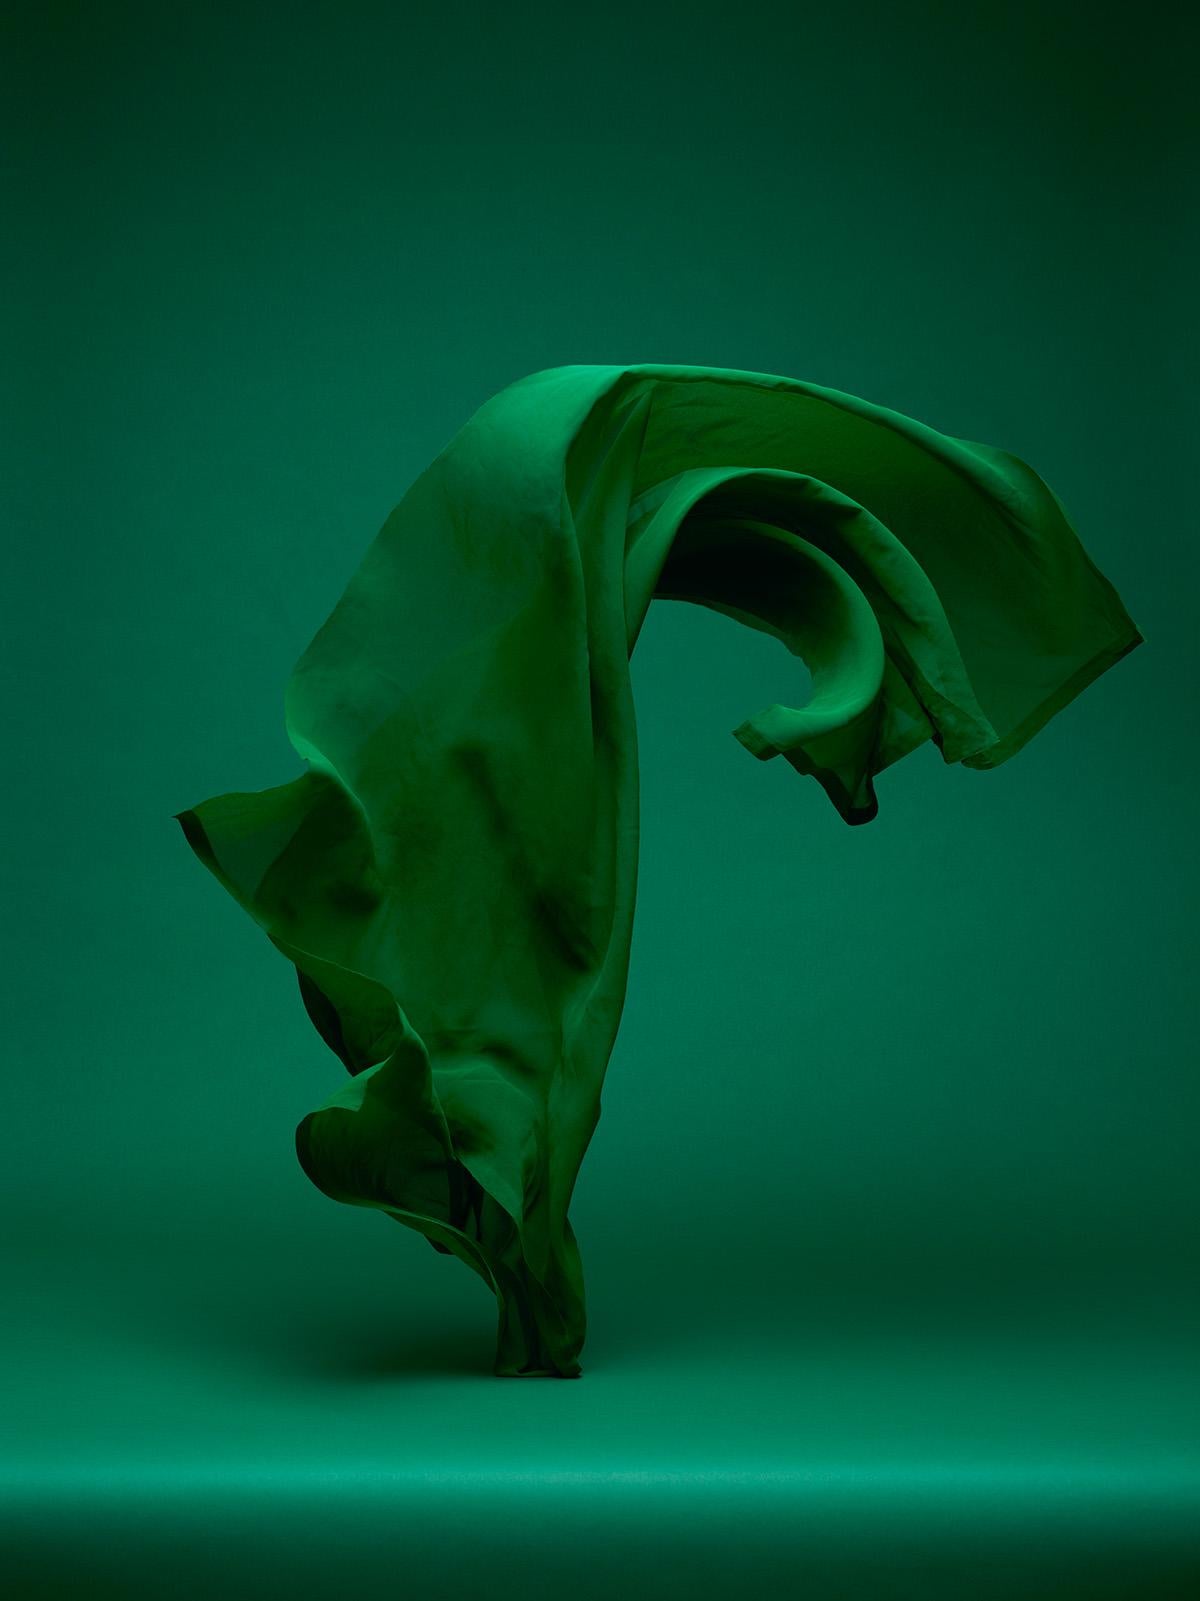 Neal Grundy Color Photograph - Dancing Fabric, Green on Green 2